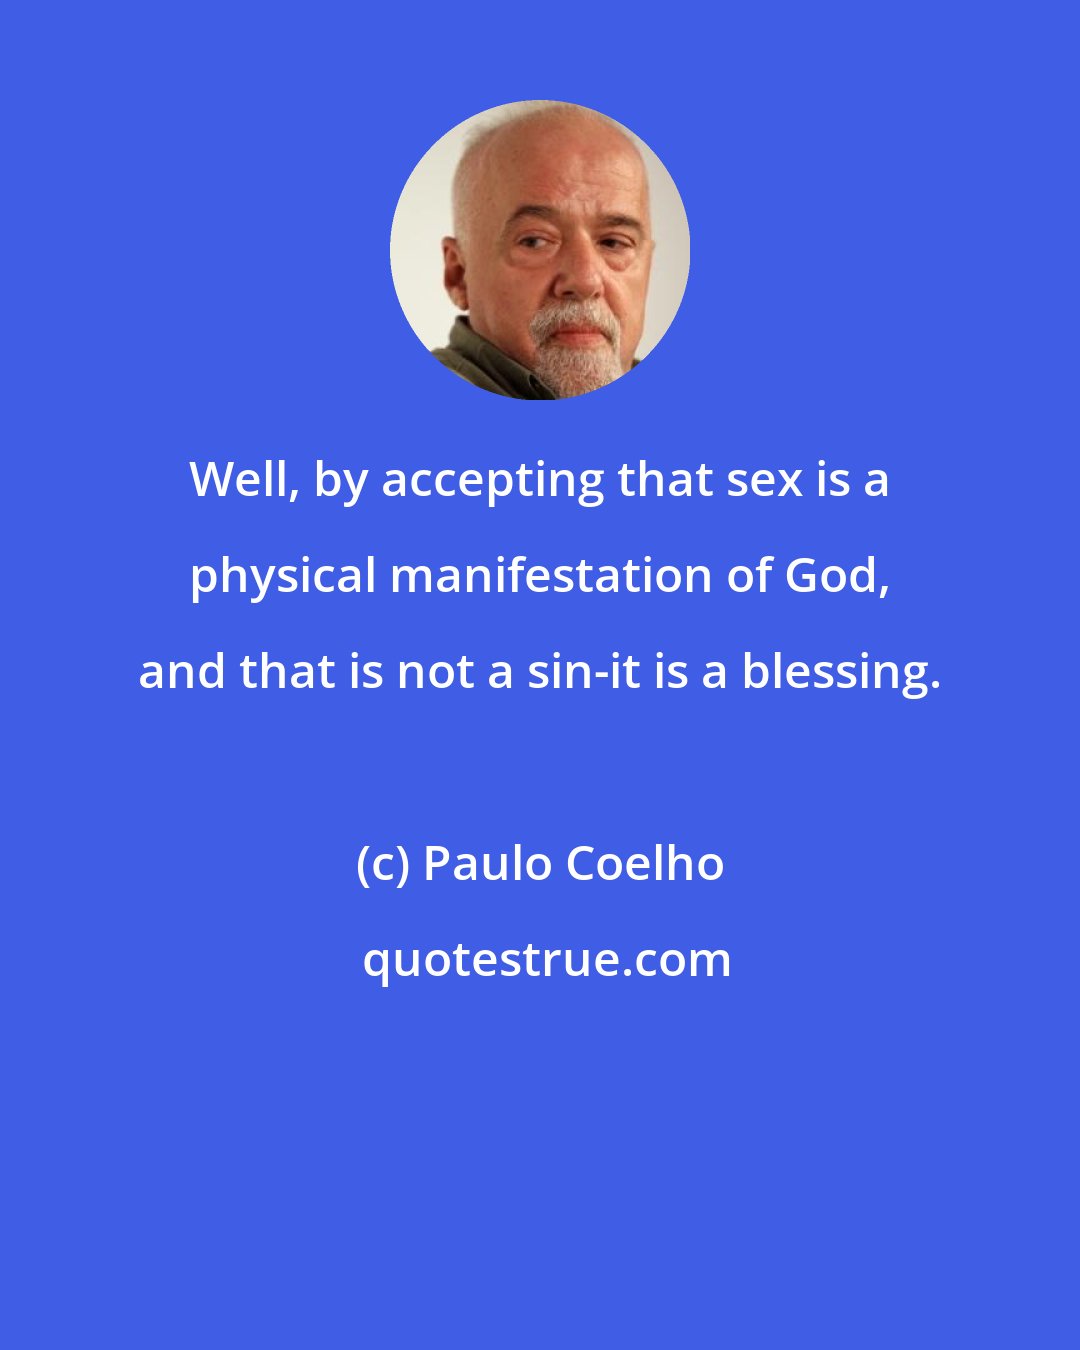 Paulo Coelho: Well, by accepting that sex is a physical manifestation of God, and that is not a sin-it is a blessing.